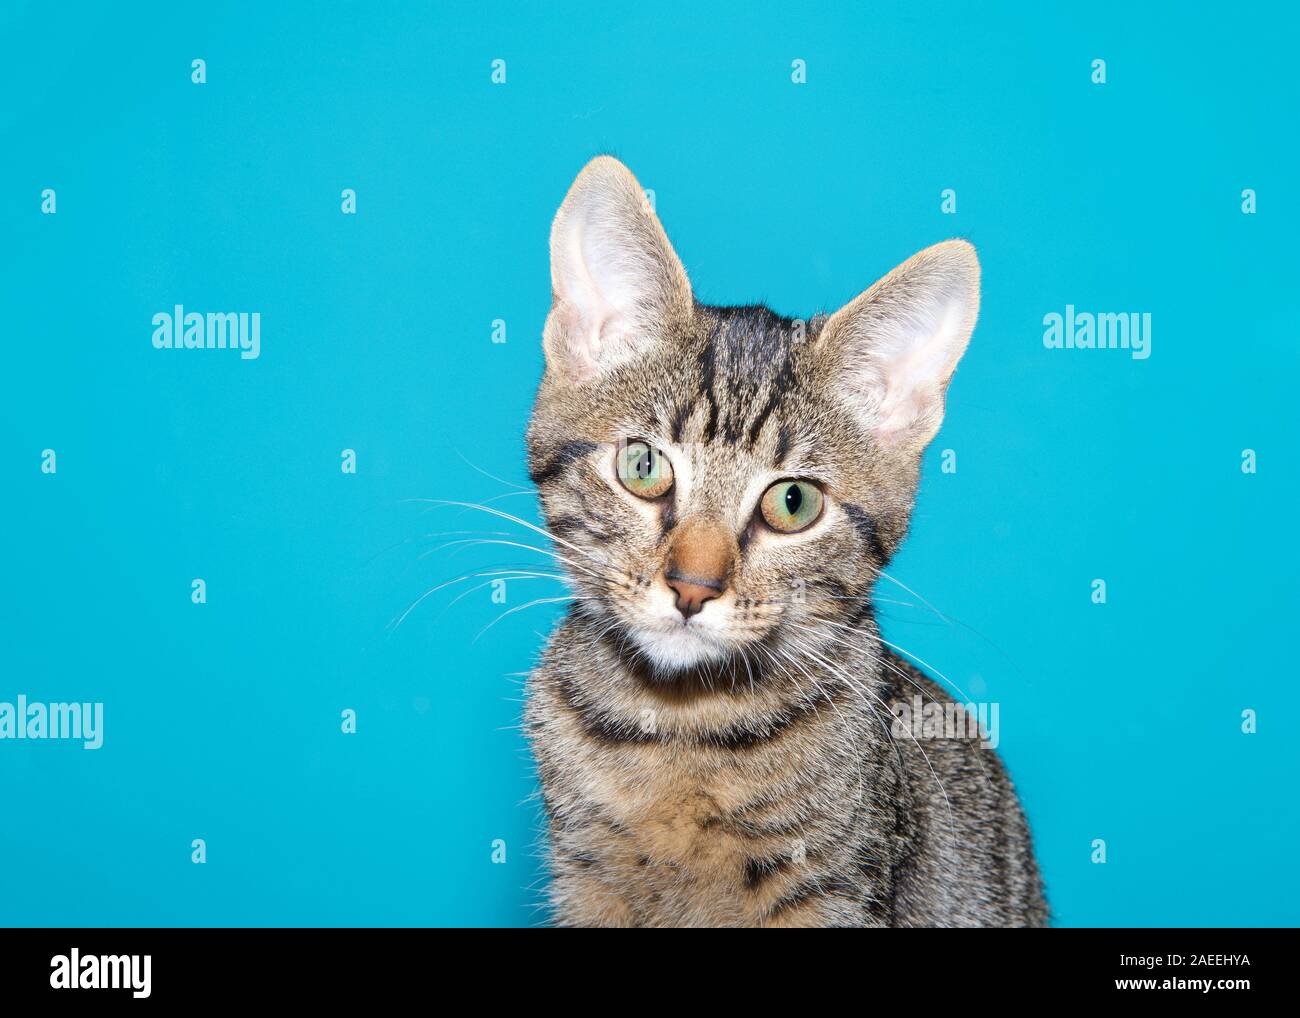 Close up portrait of an adorable black and gray tabby kitten looking directly at viewer, head tilted with curious expression. Adorable. Turquoise teal Stock Photo